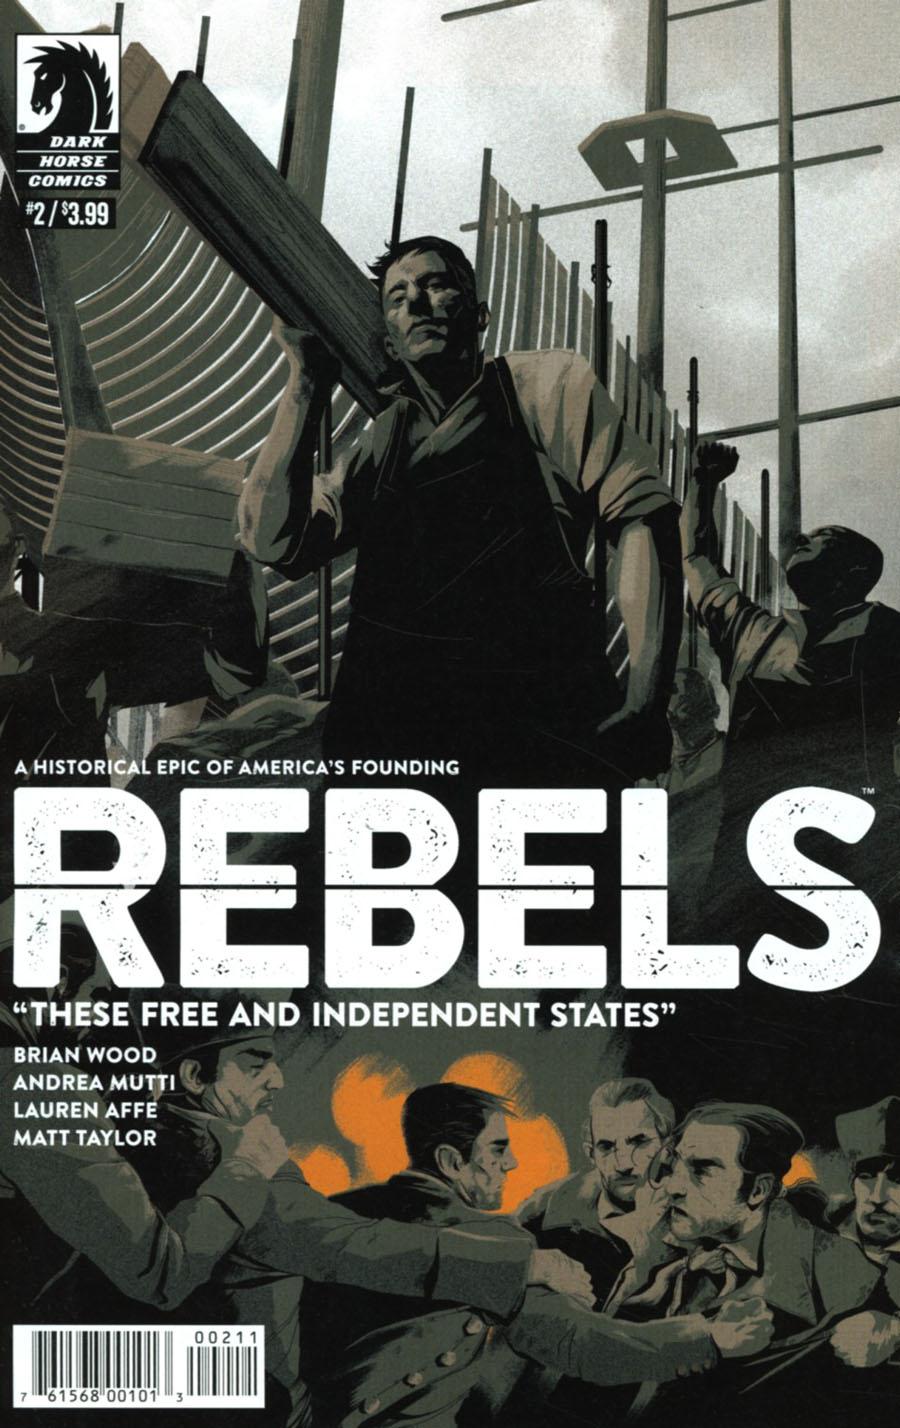 Rebels These Free And Independent States Vol. 1 #2